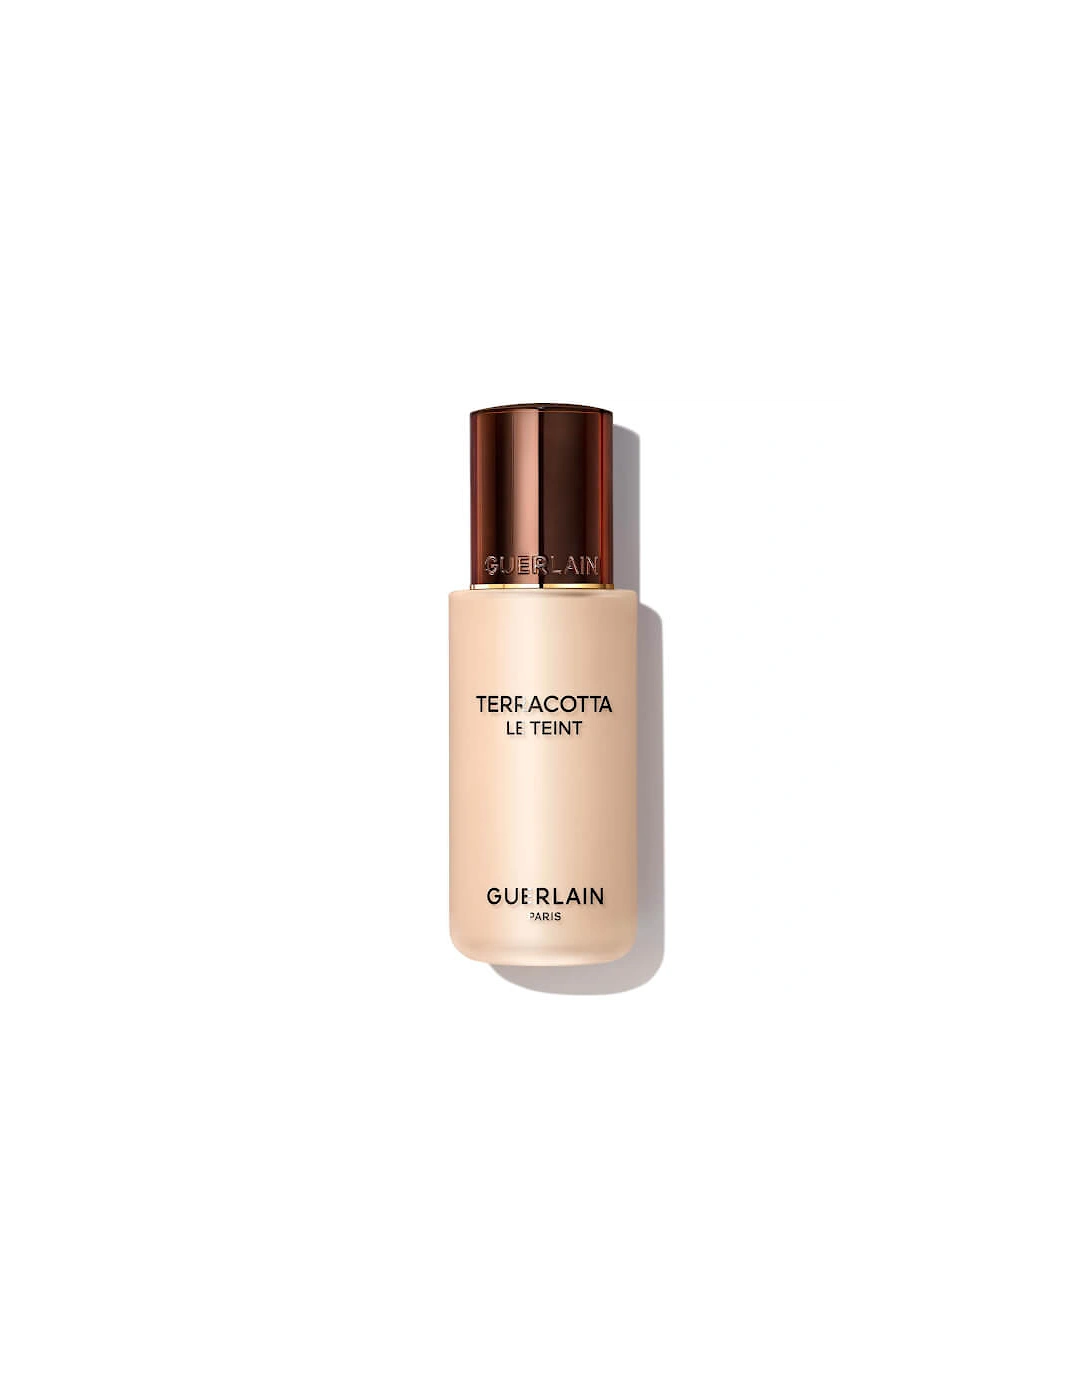 Terracotta Le Teint Healthy Glow Natural Perfection Foundation - 0N, 2 of 1